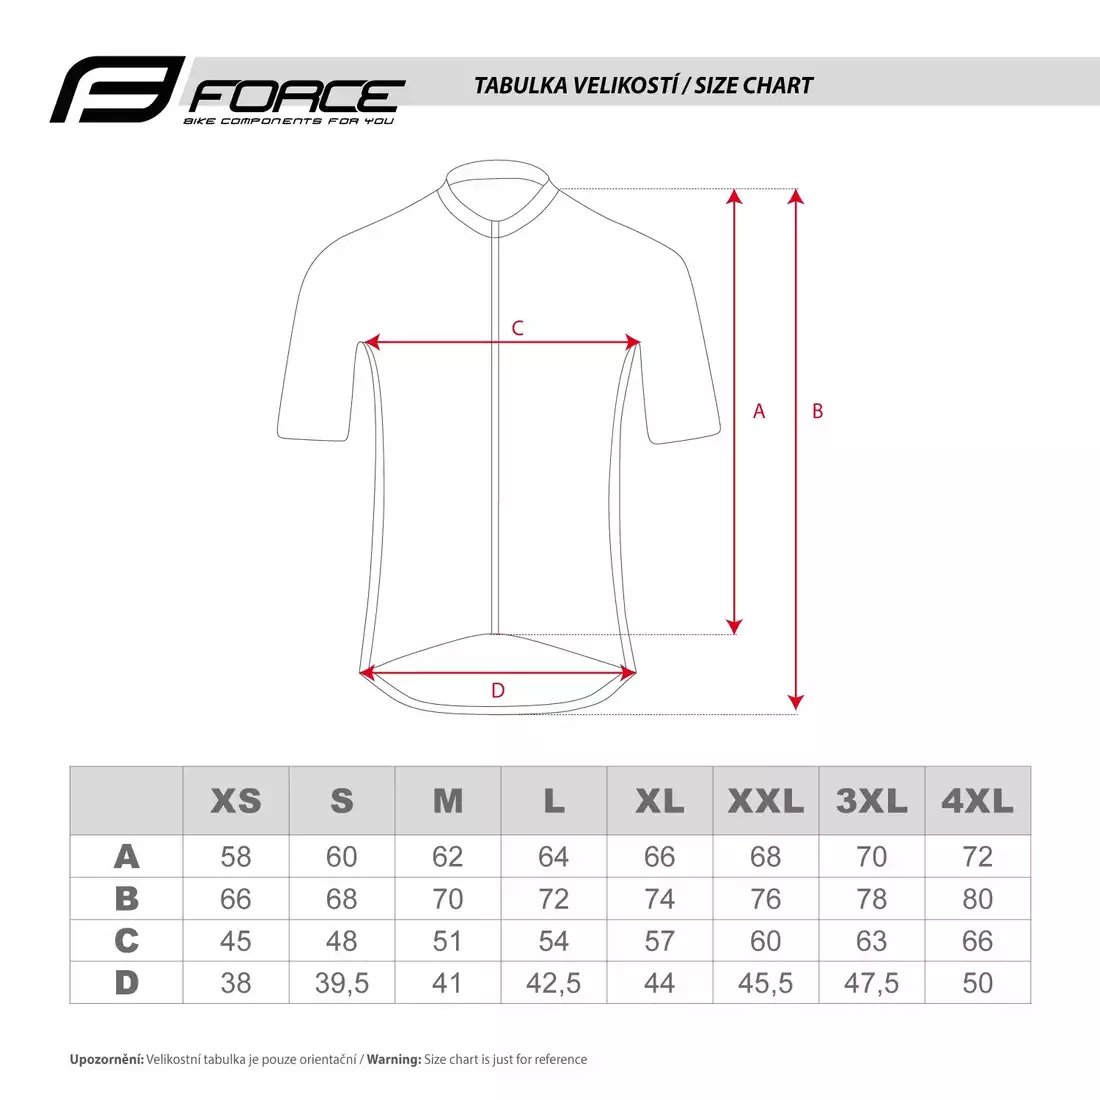 FORCE ROCK Cycling jersey, gray and black